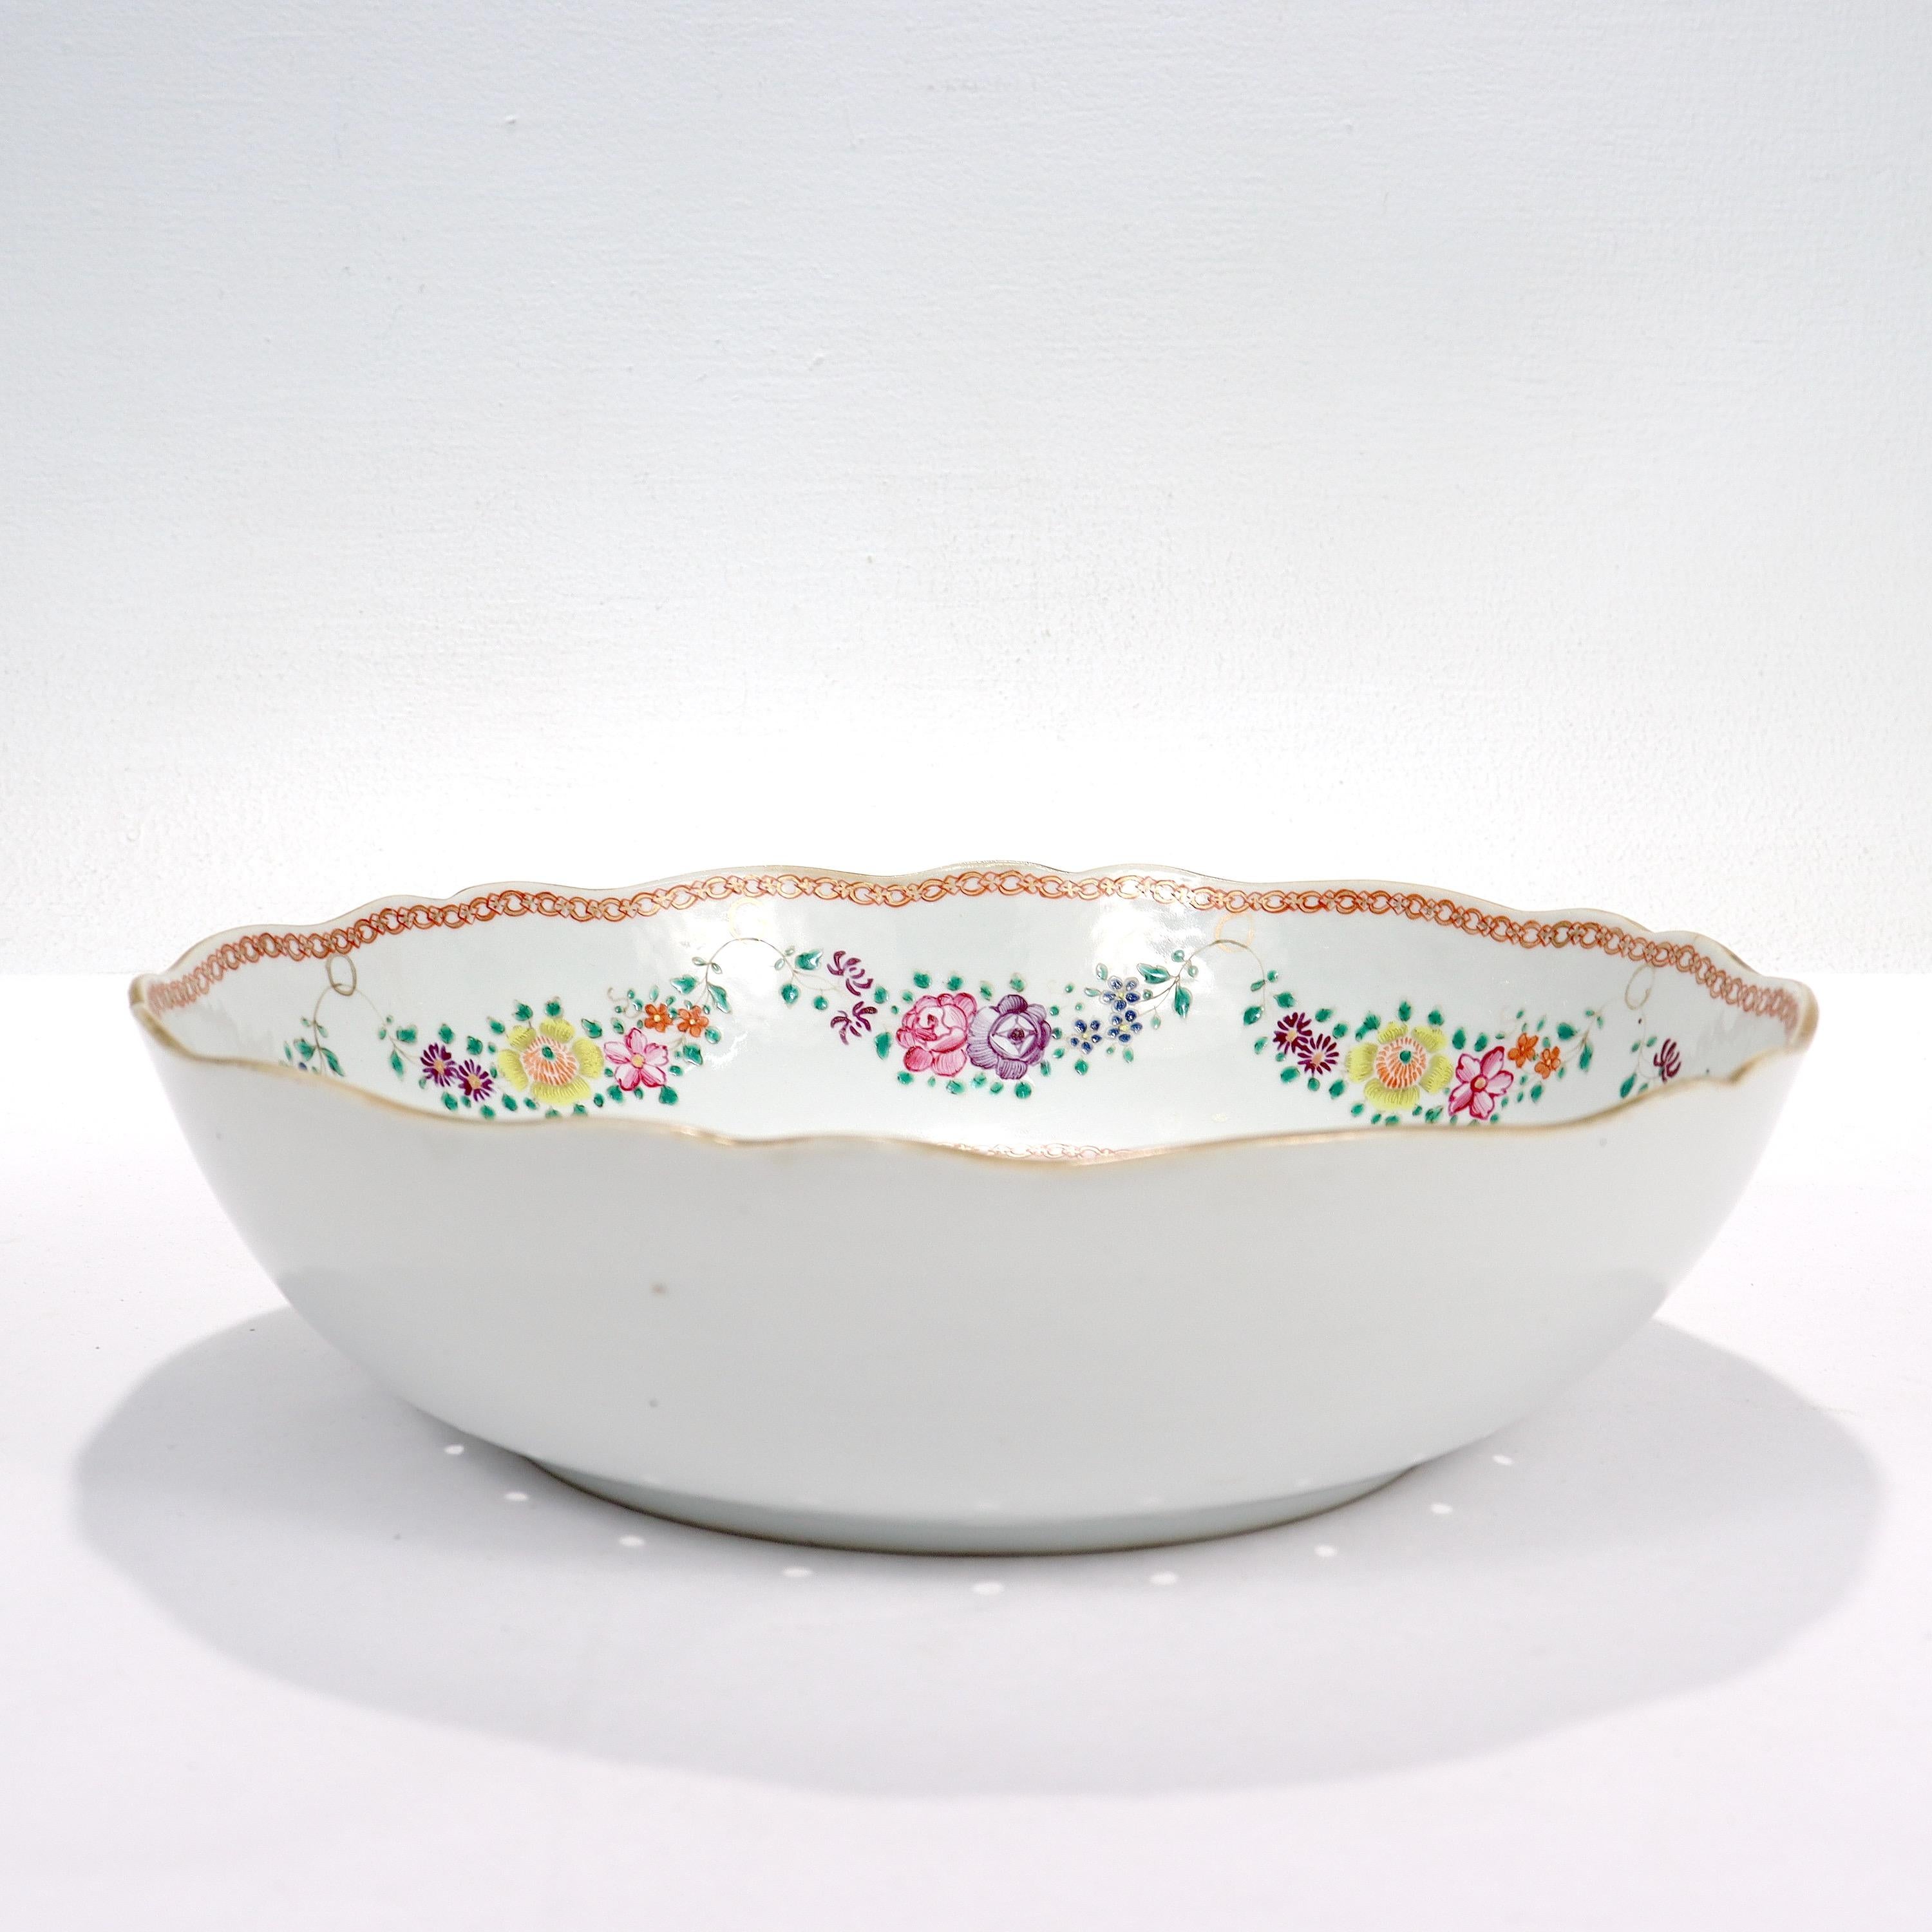 Antique Samson Porcelain Chinese Export Style Reticulated Fruit Bowl For Sale 2